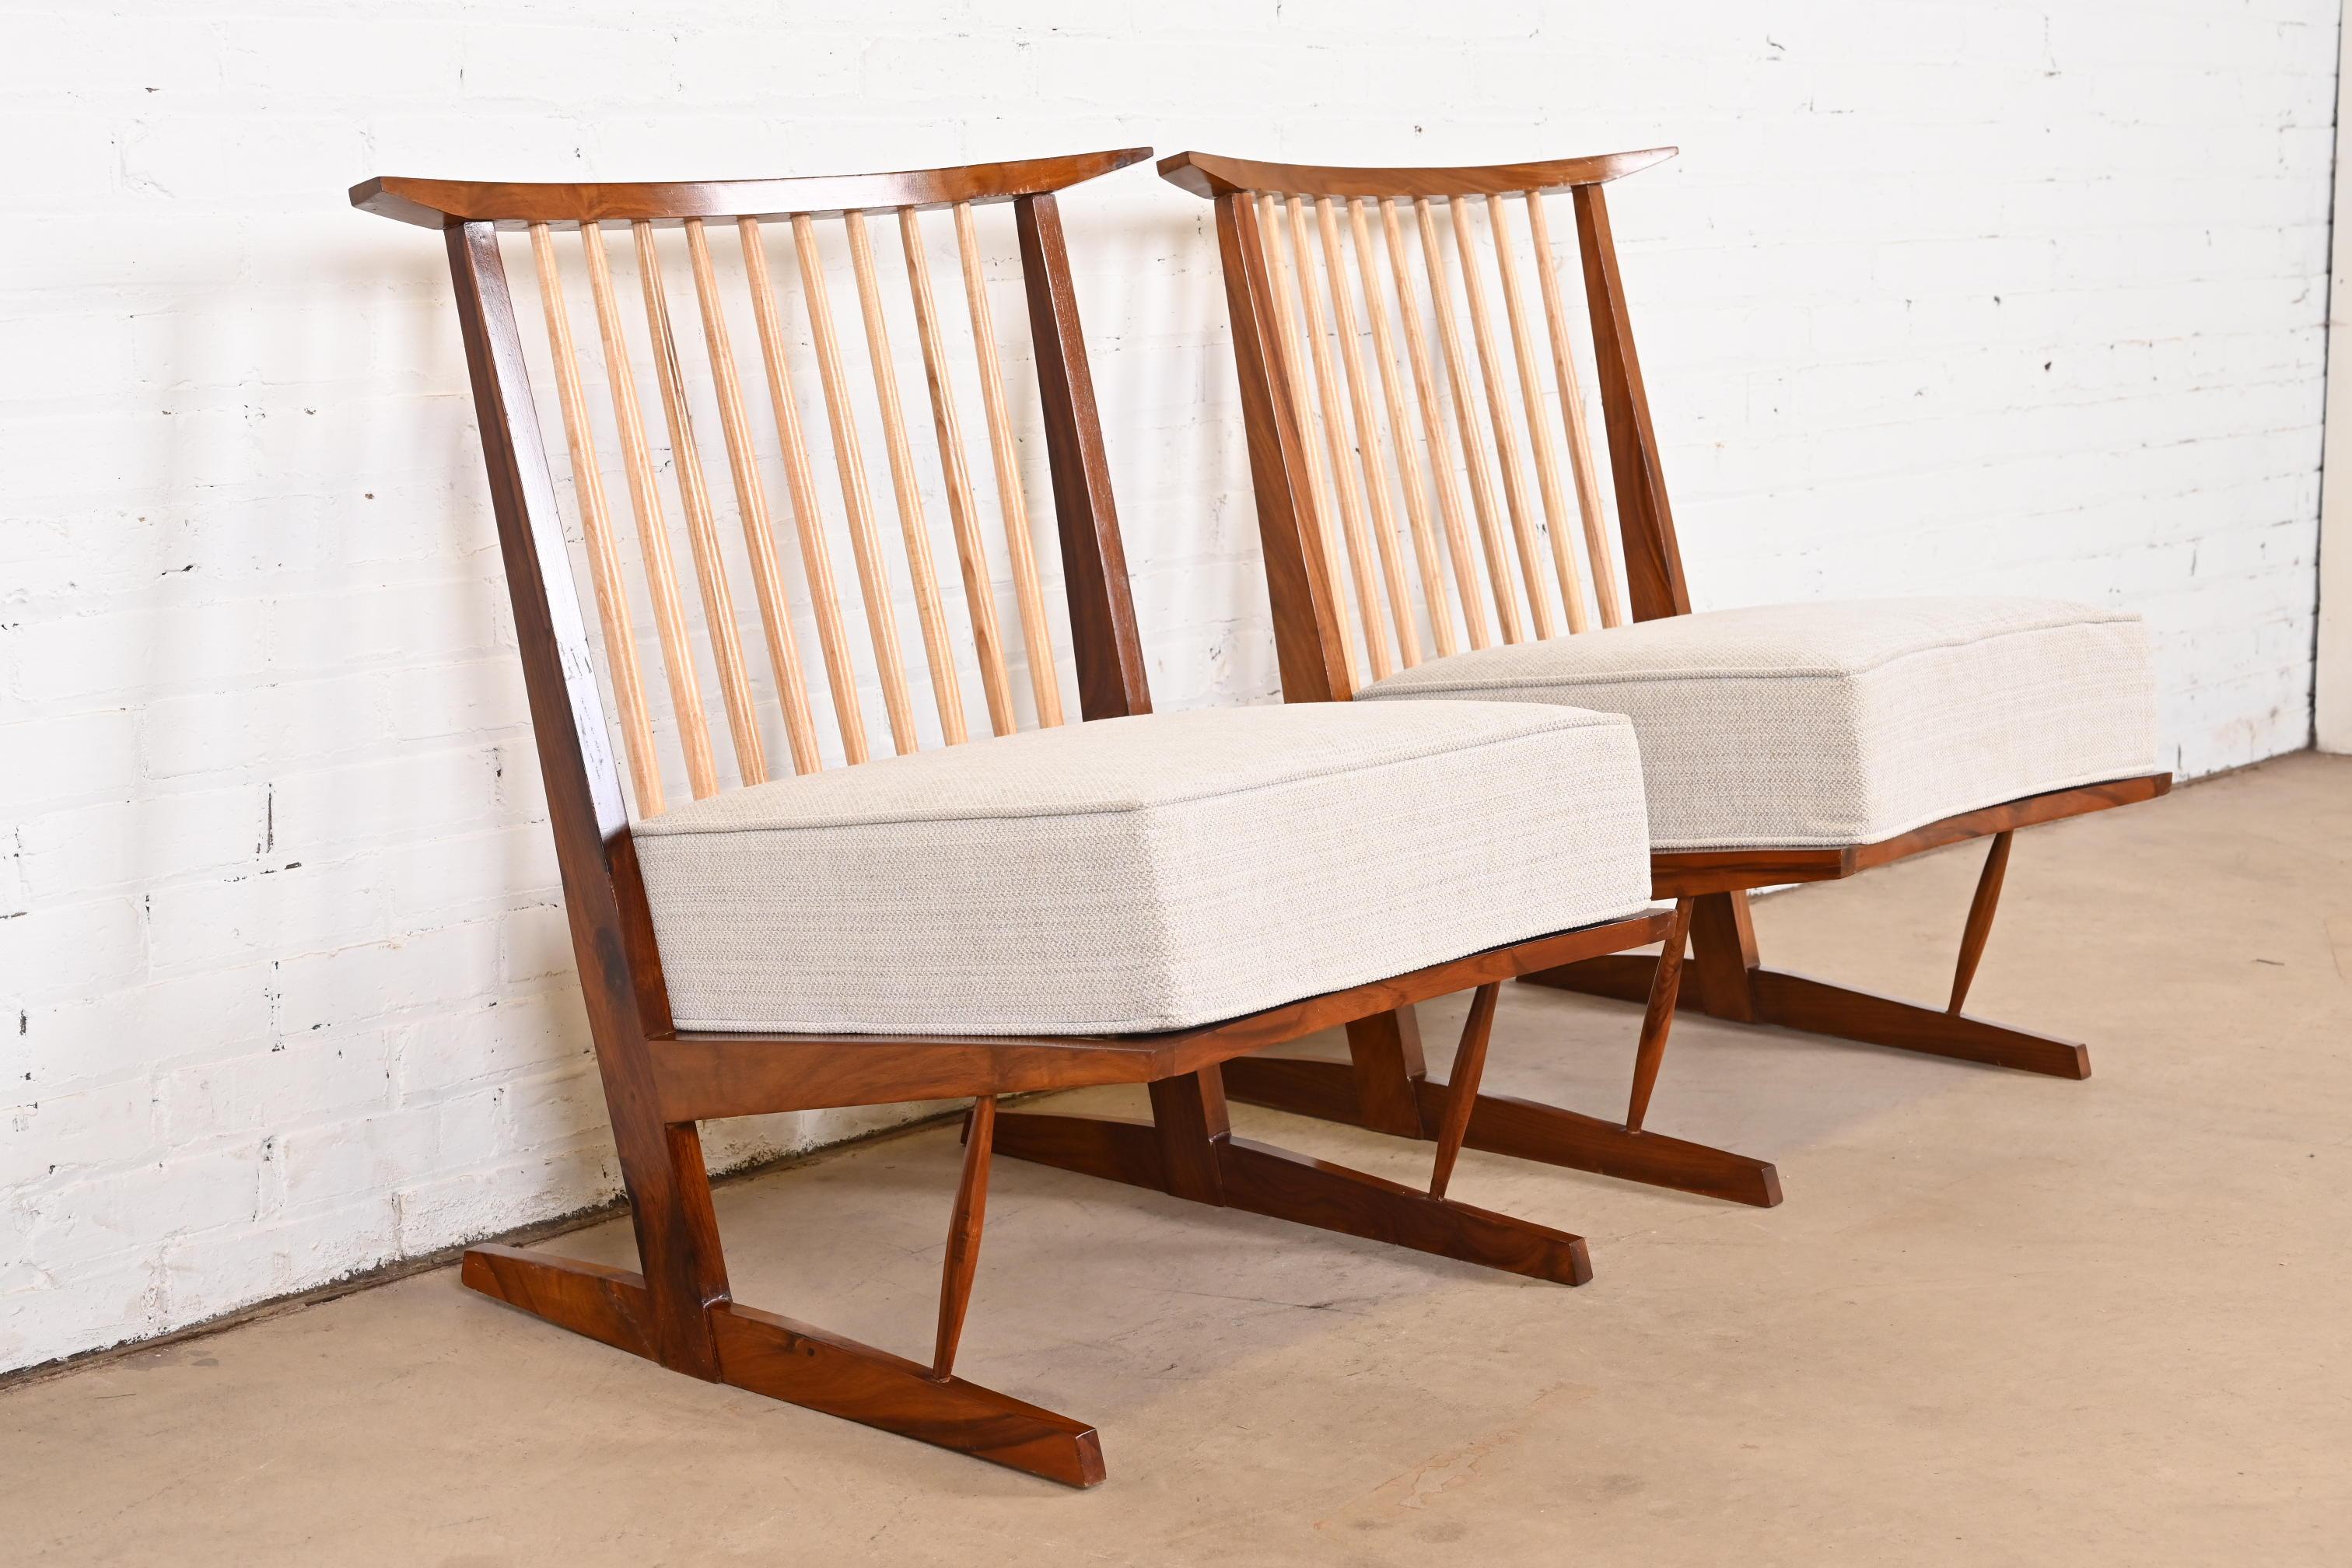 Upholstery Conoid Lounge Chairs in Sculpted Walnut After George Nakashima, Pair